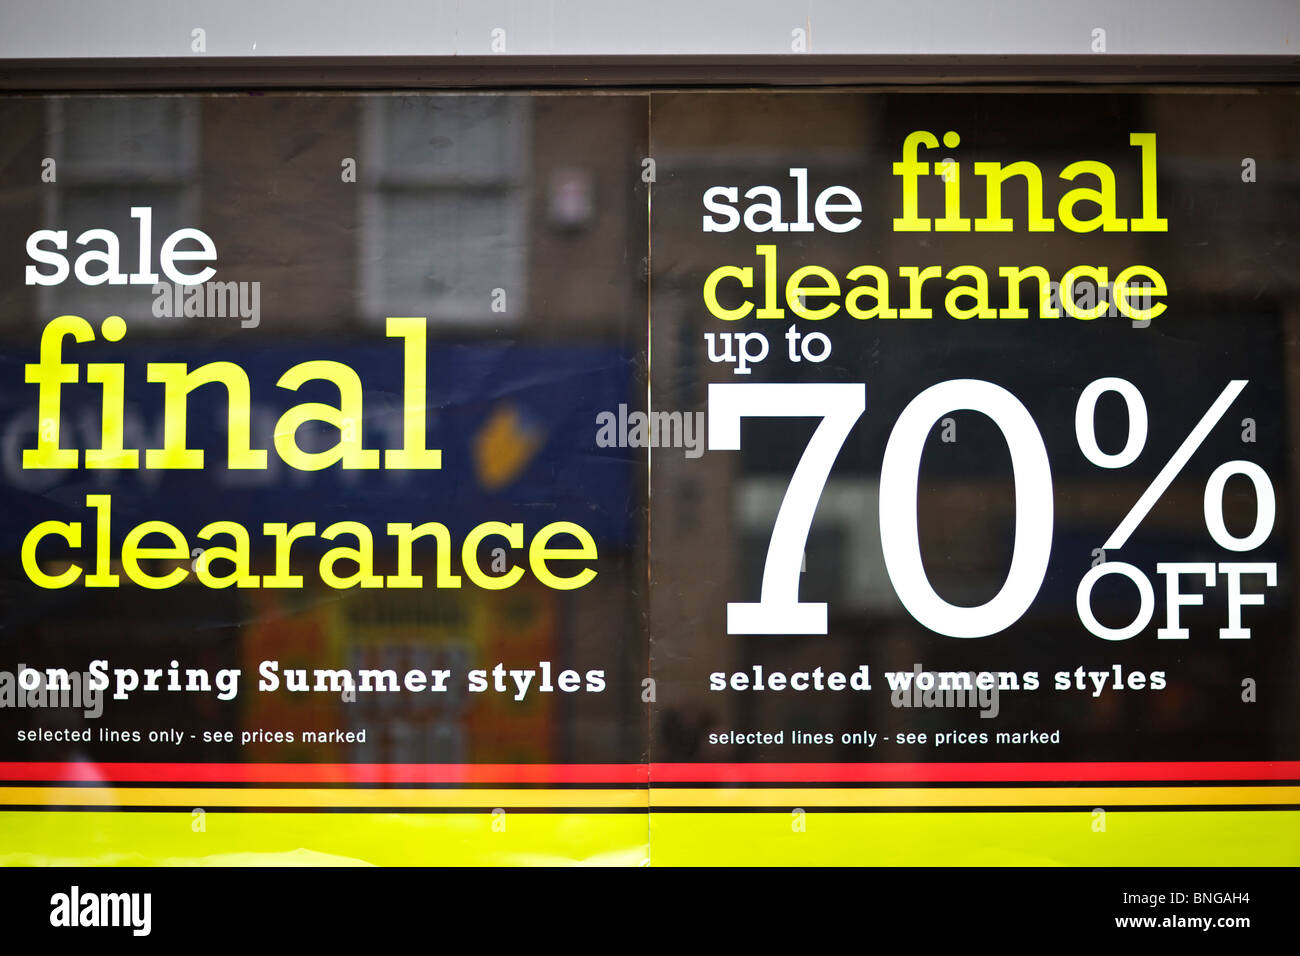 Money Saver By Dansway - WOMENS UP TO 70% OFF FINAL CLEARANCE SALE